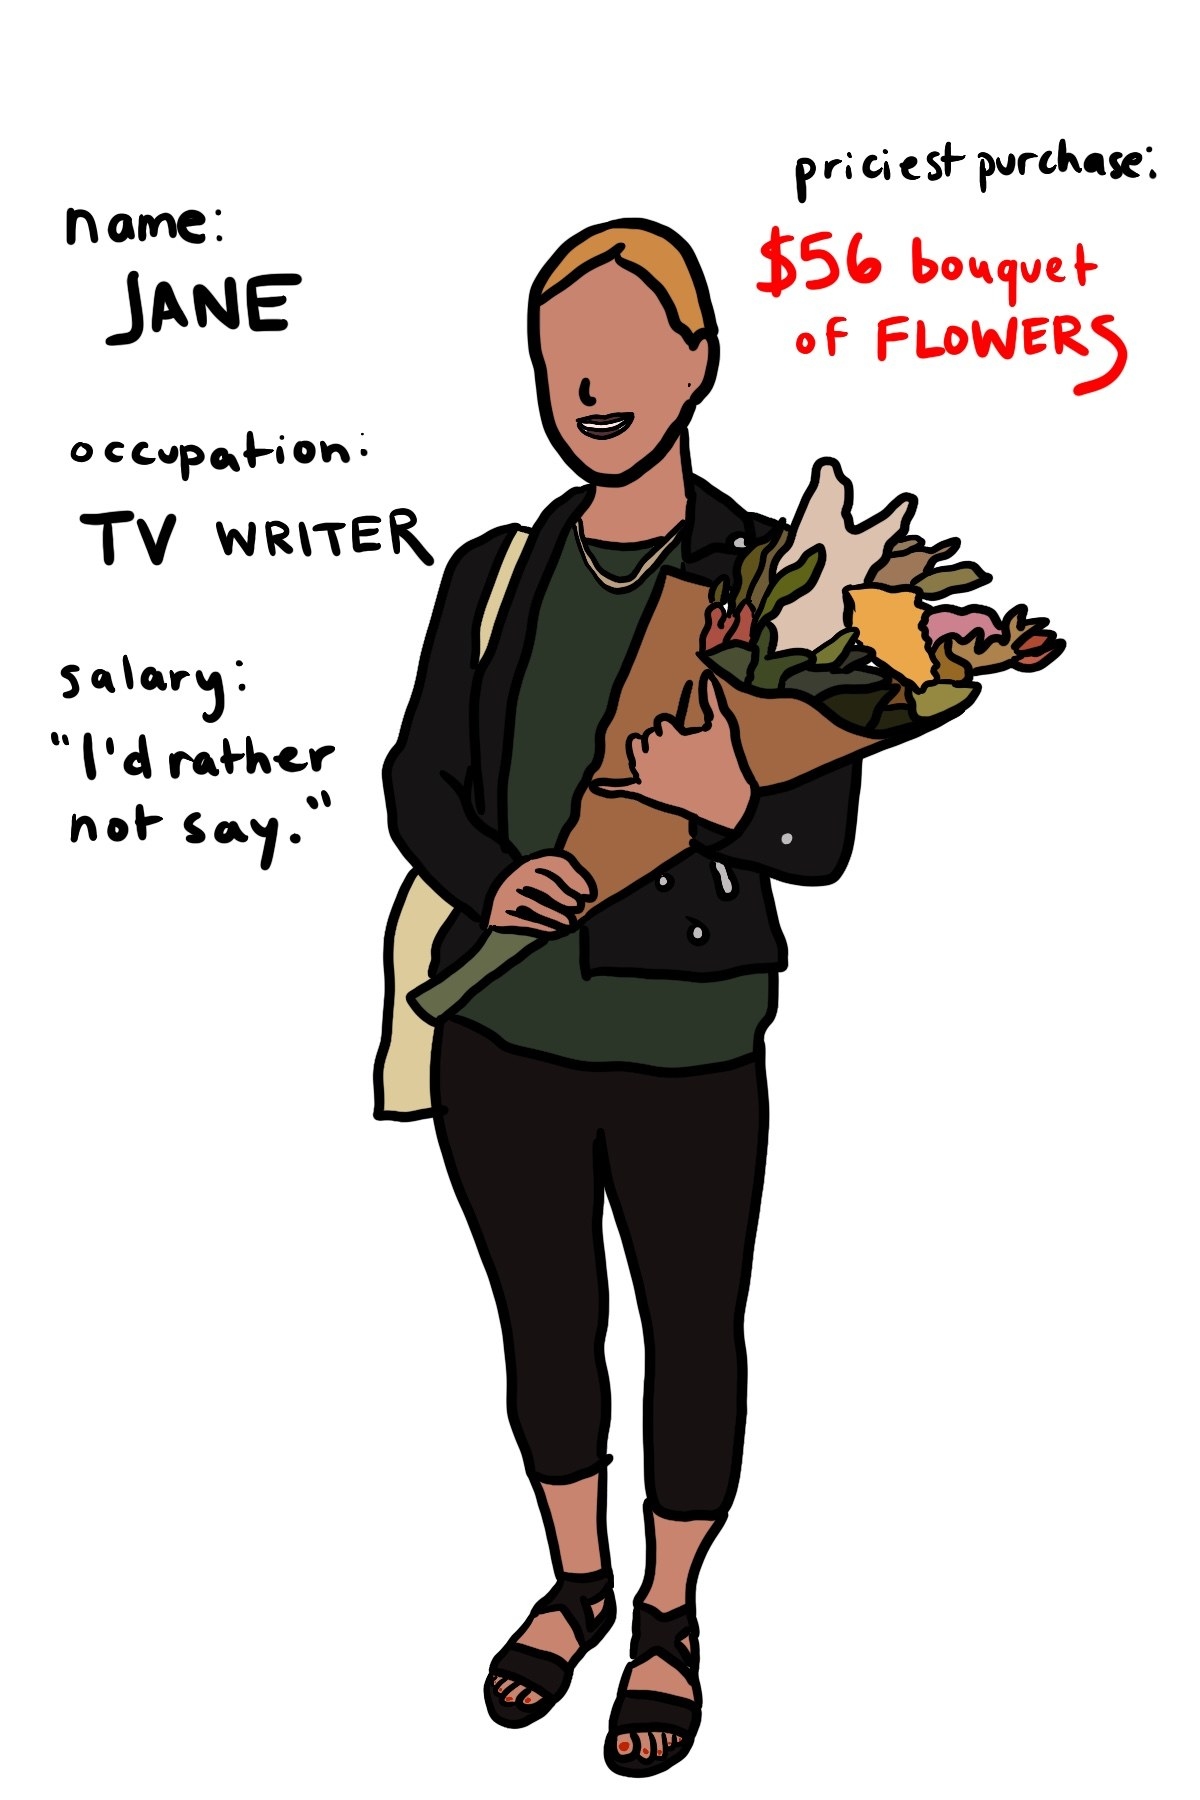 Customer who&#x27;s a TV writer and won&#x27;t give salary with $56 flower bouquet